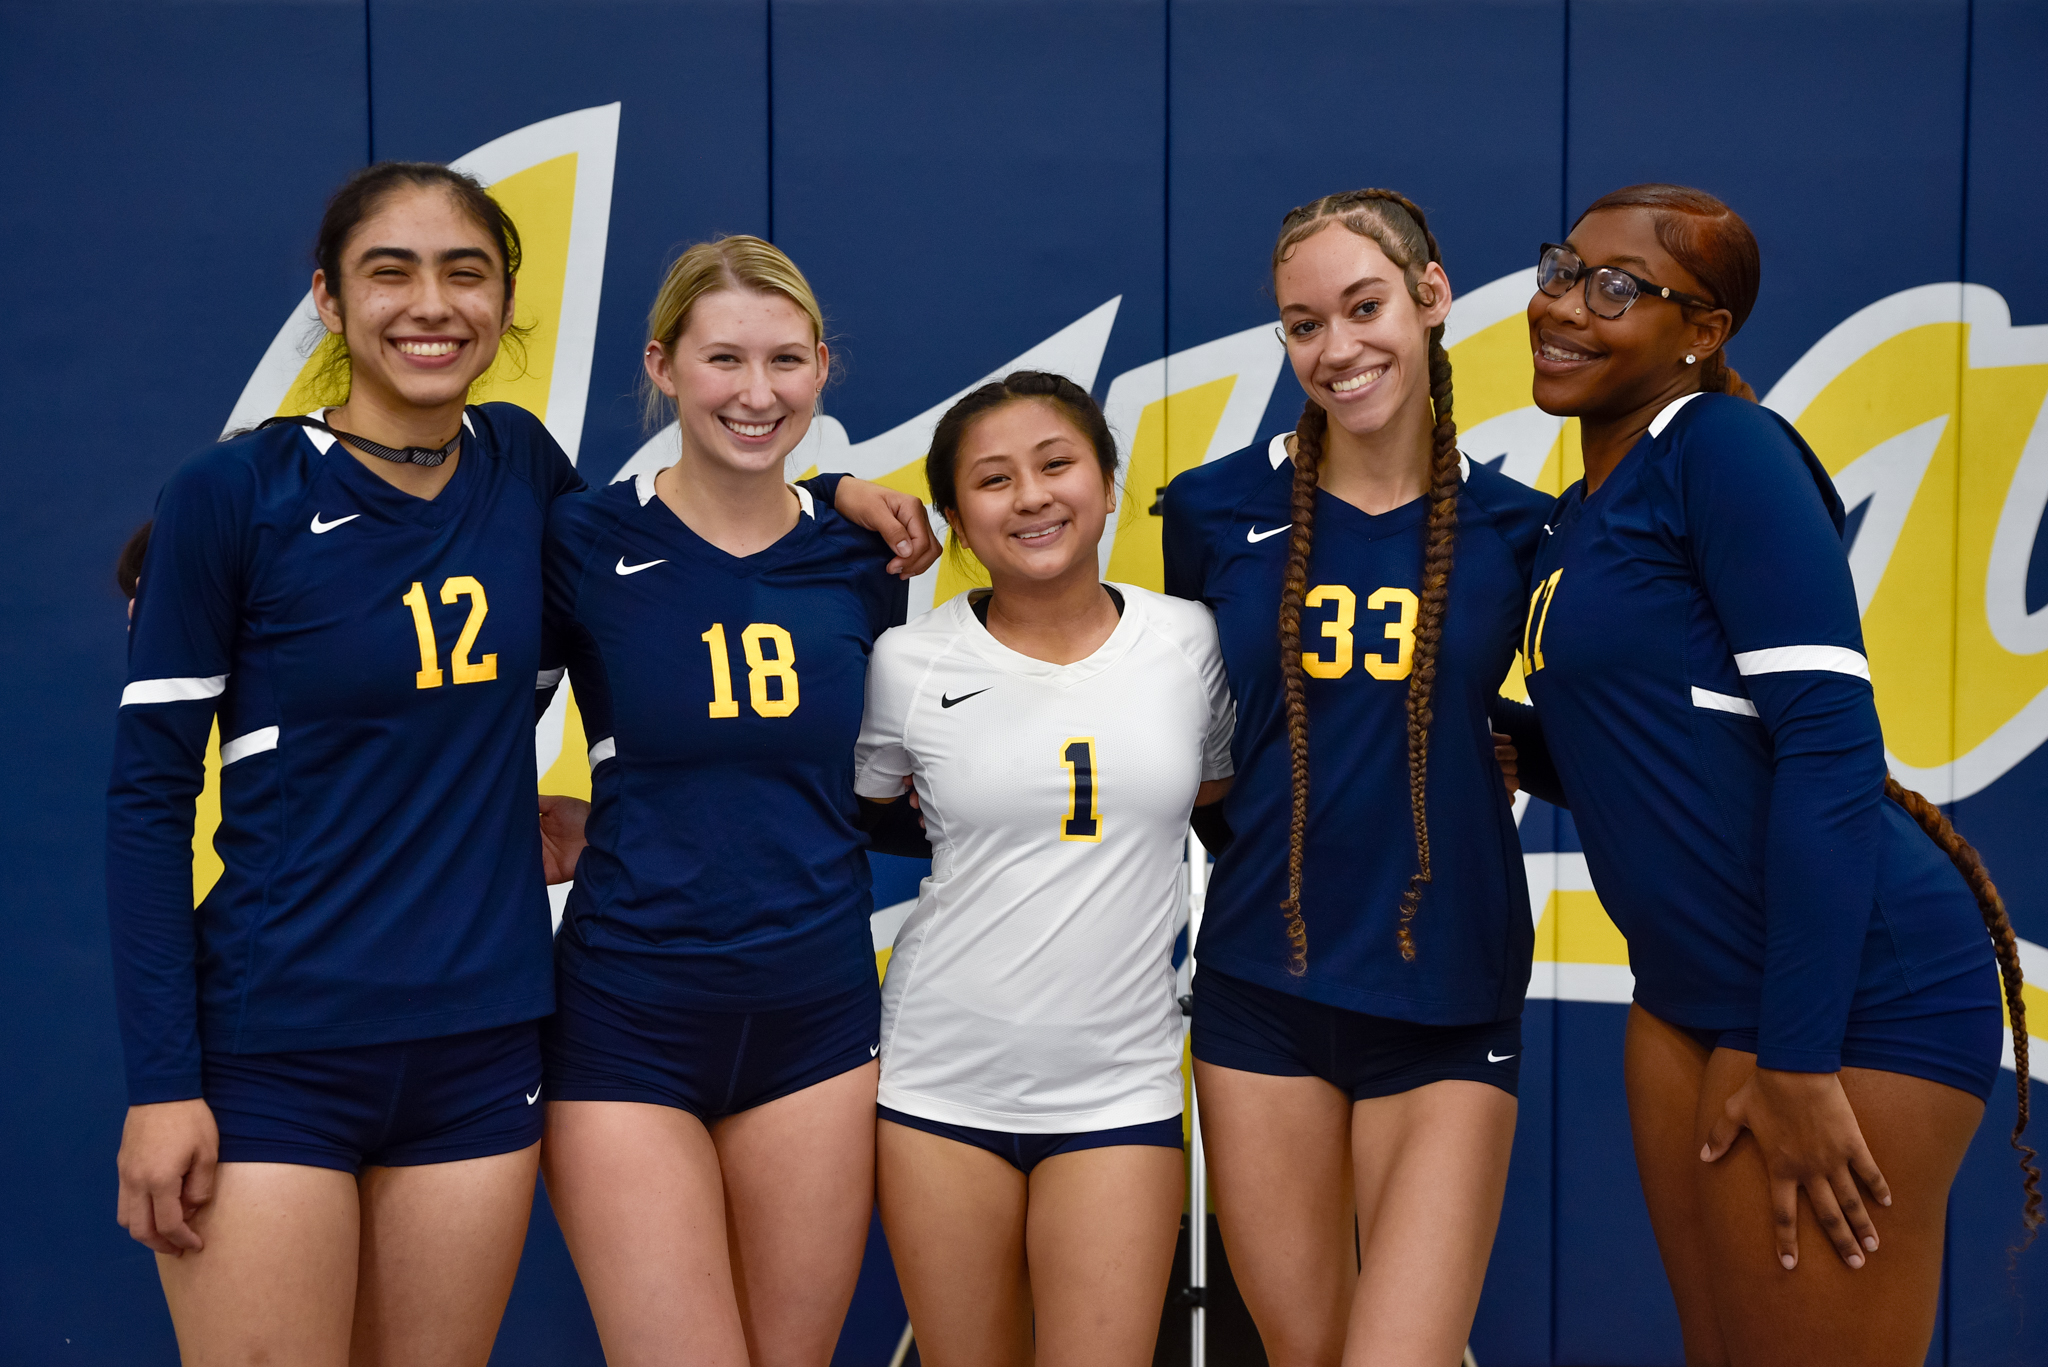 Group picture of College of the Canyons women's volleyball players Priscilla Miranda, Kira Hooper, Madison Gomez, Kyla Dotard and Lamia Benjamin.